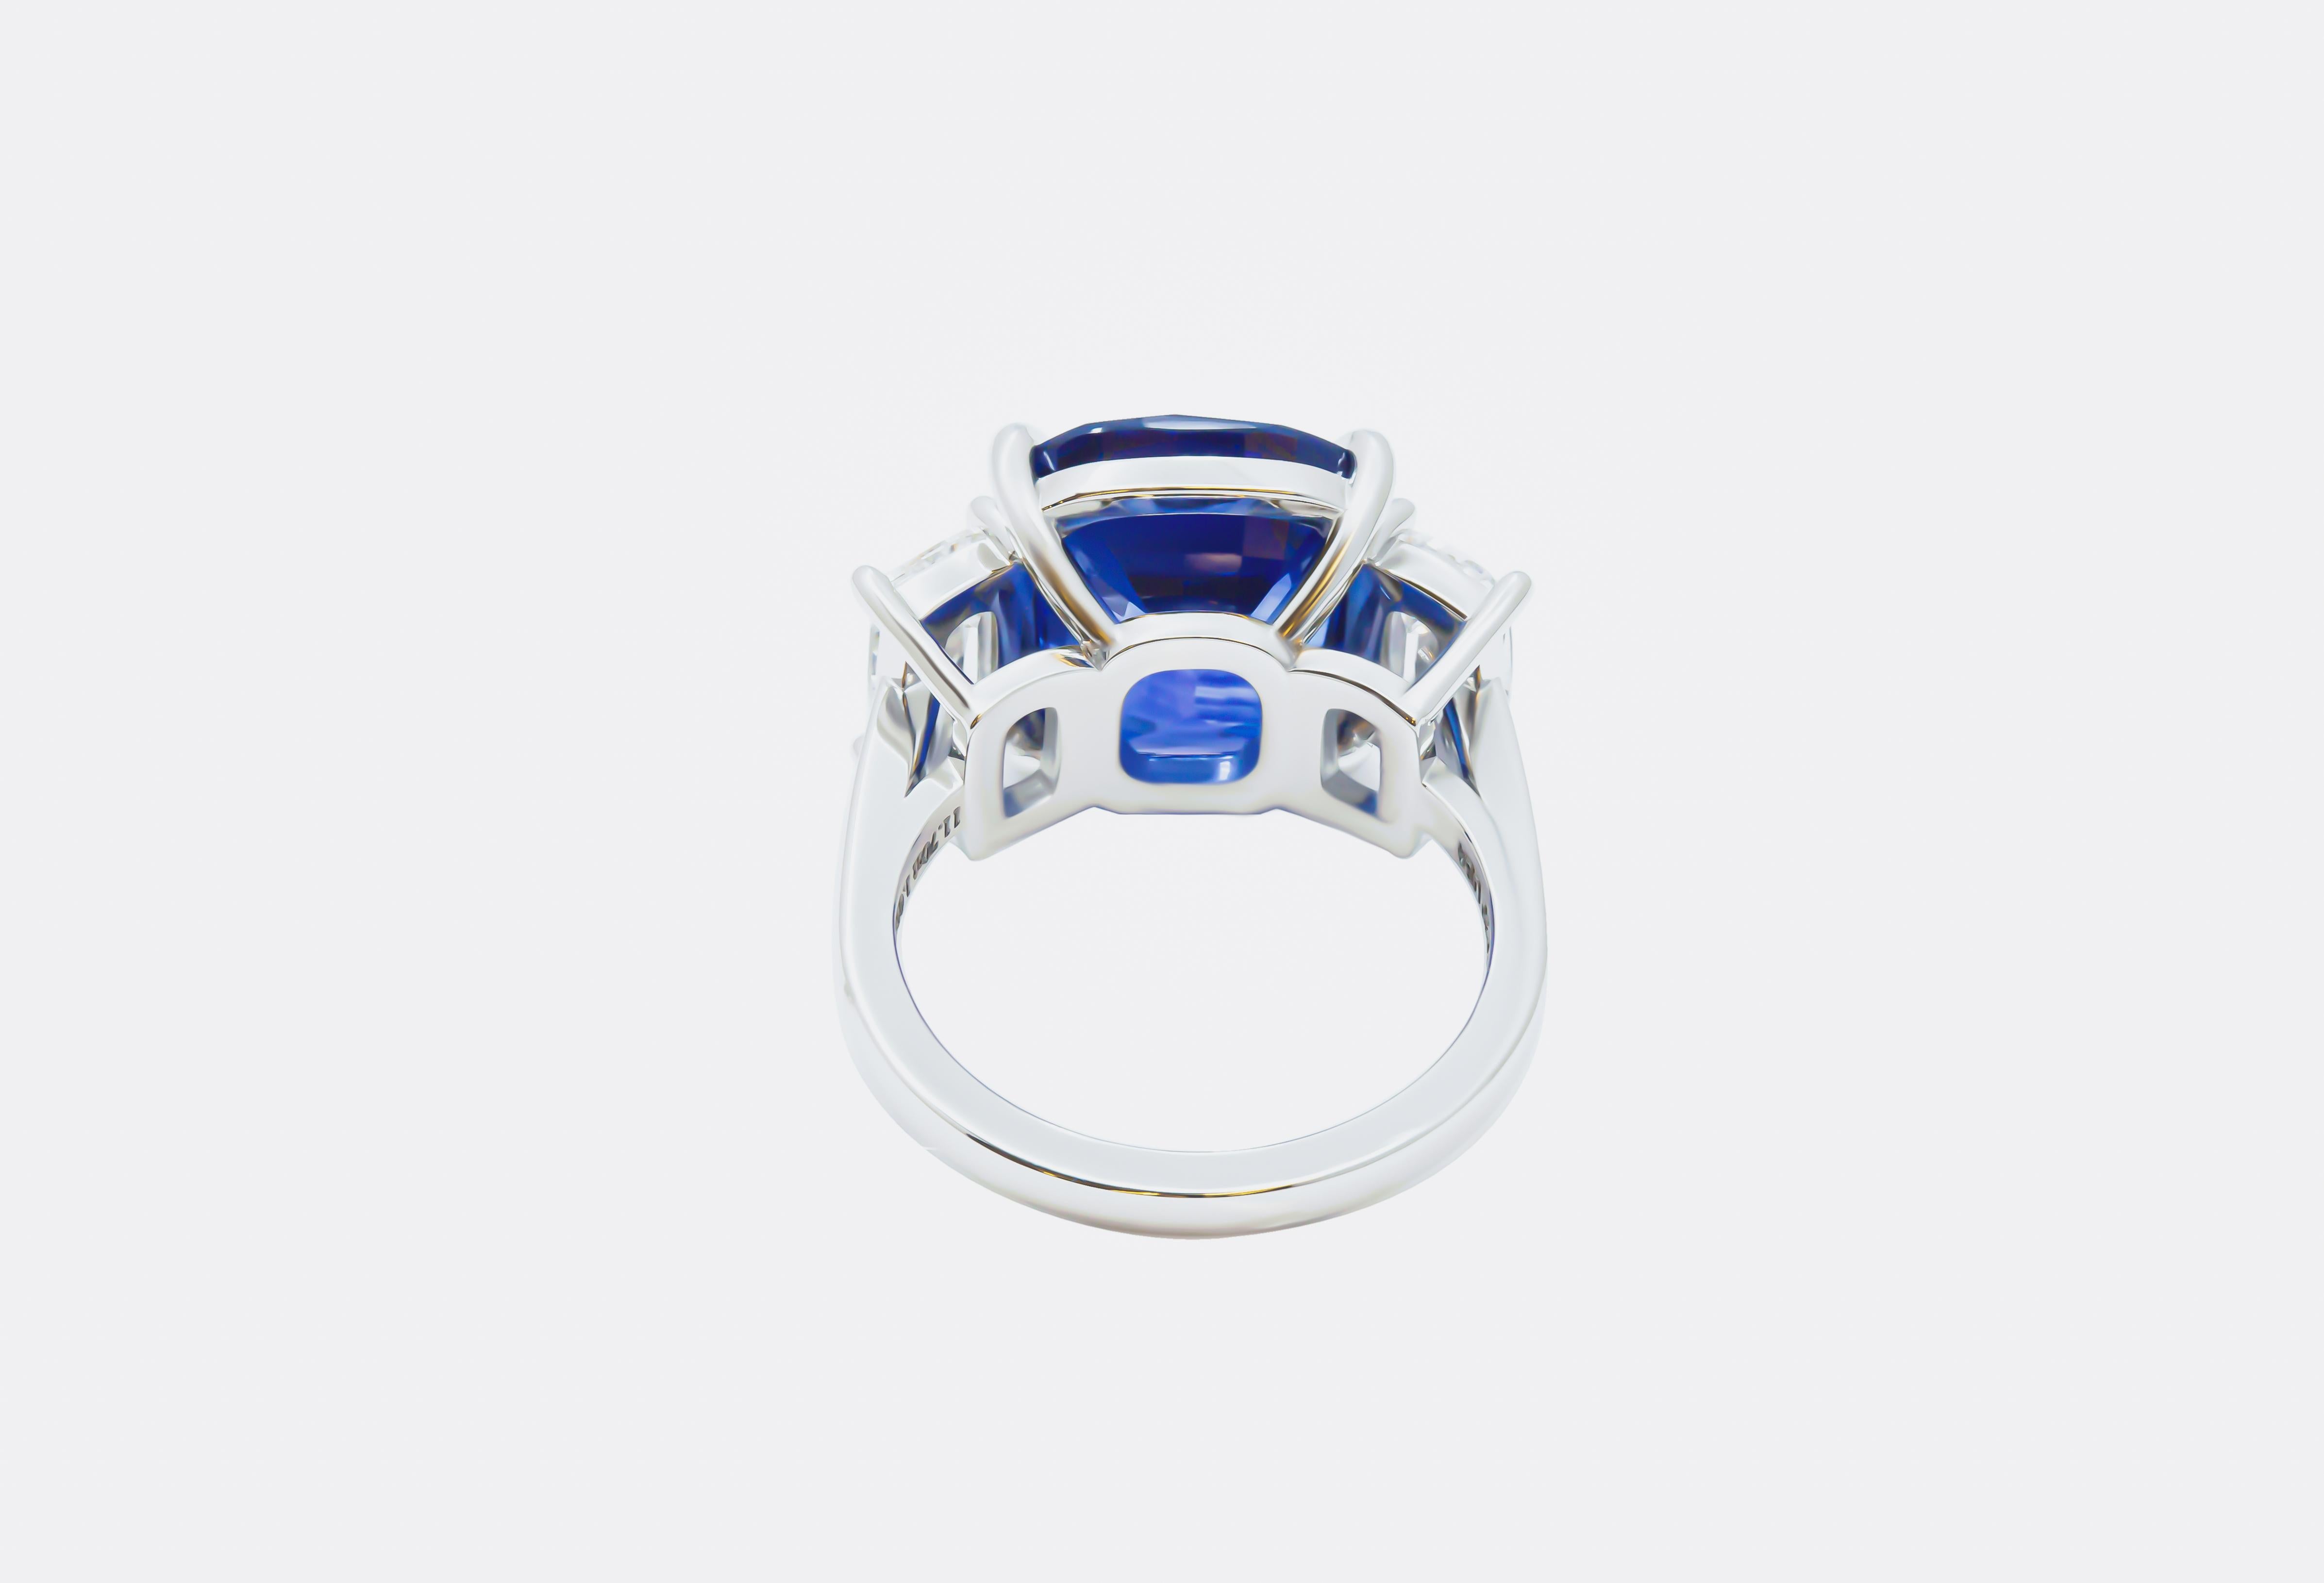 Introducing a truly enchanting masterpiece, behold the exquisite allure of our three-stone ring featuring a magnificent 11-carat blue cushion-cut sapphire as its centerpiece. This resplendent gem, certified by the Gemological Institute of America